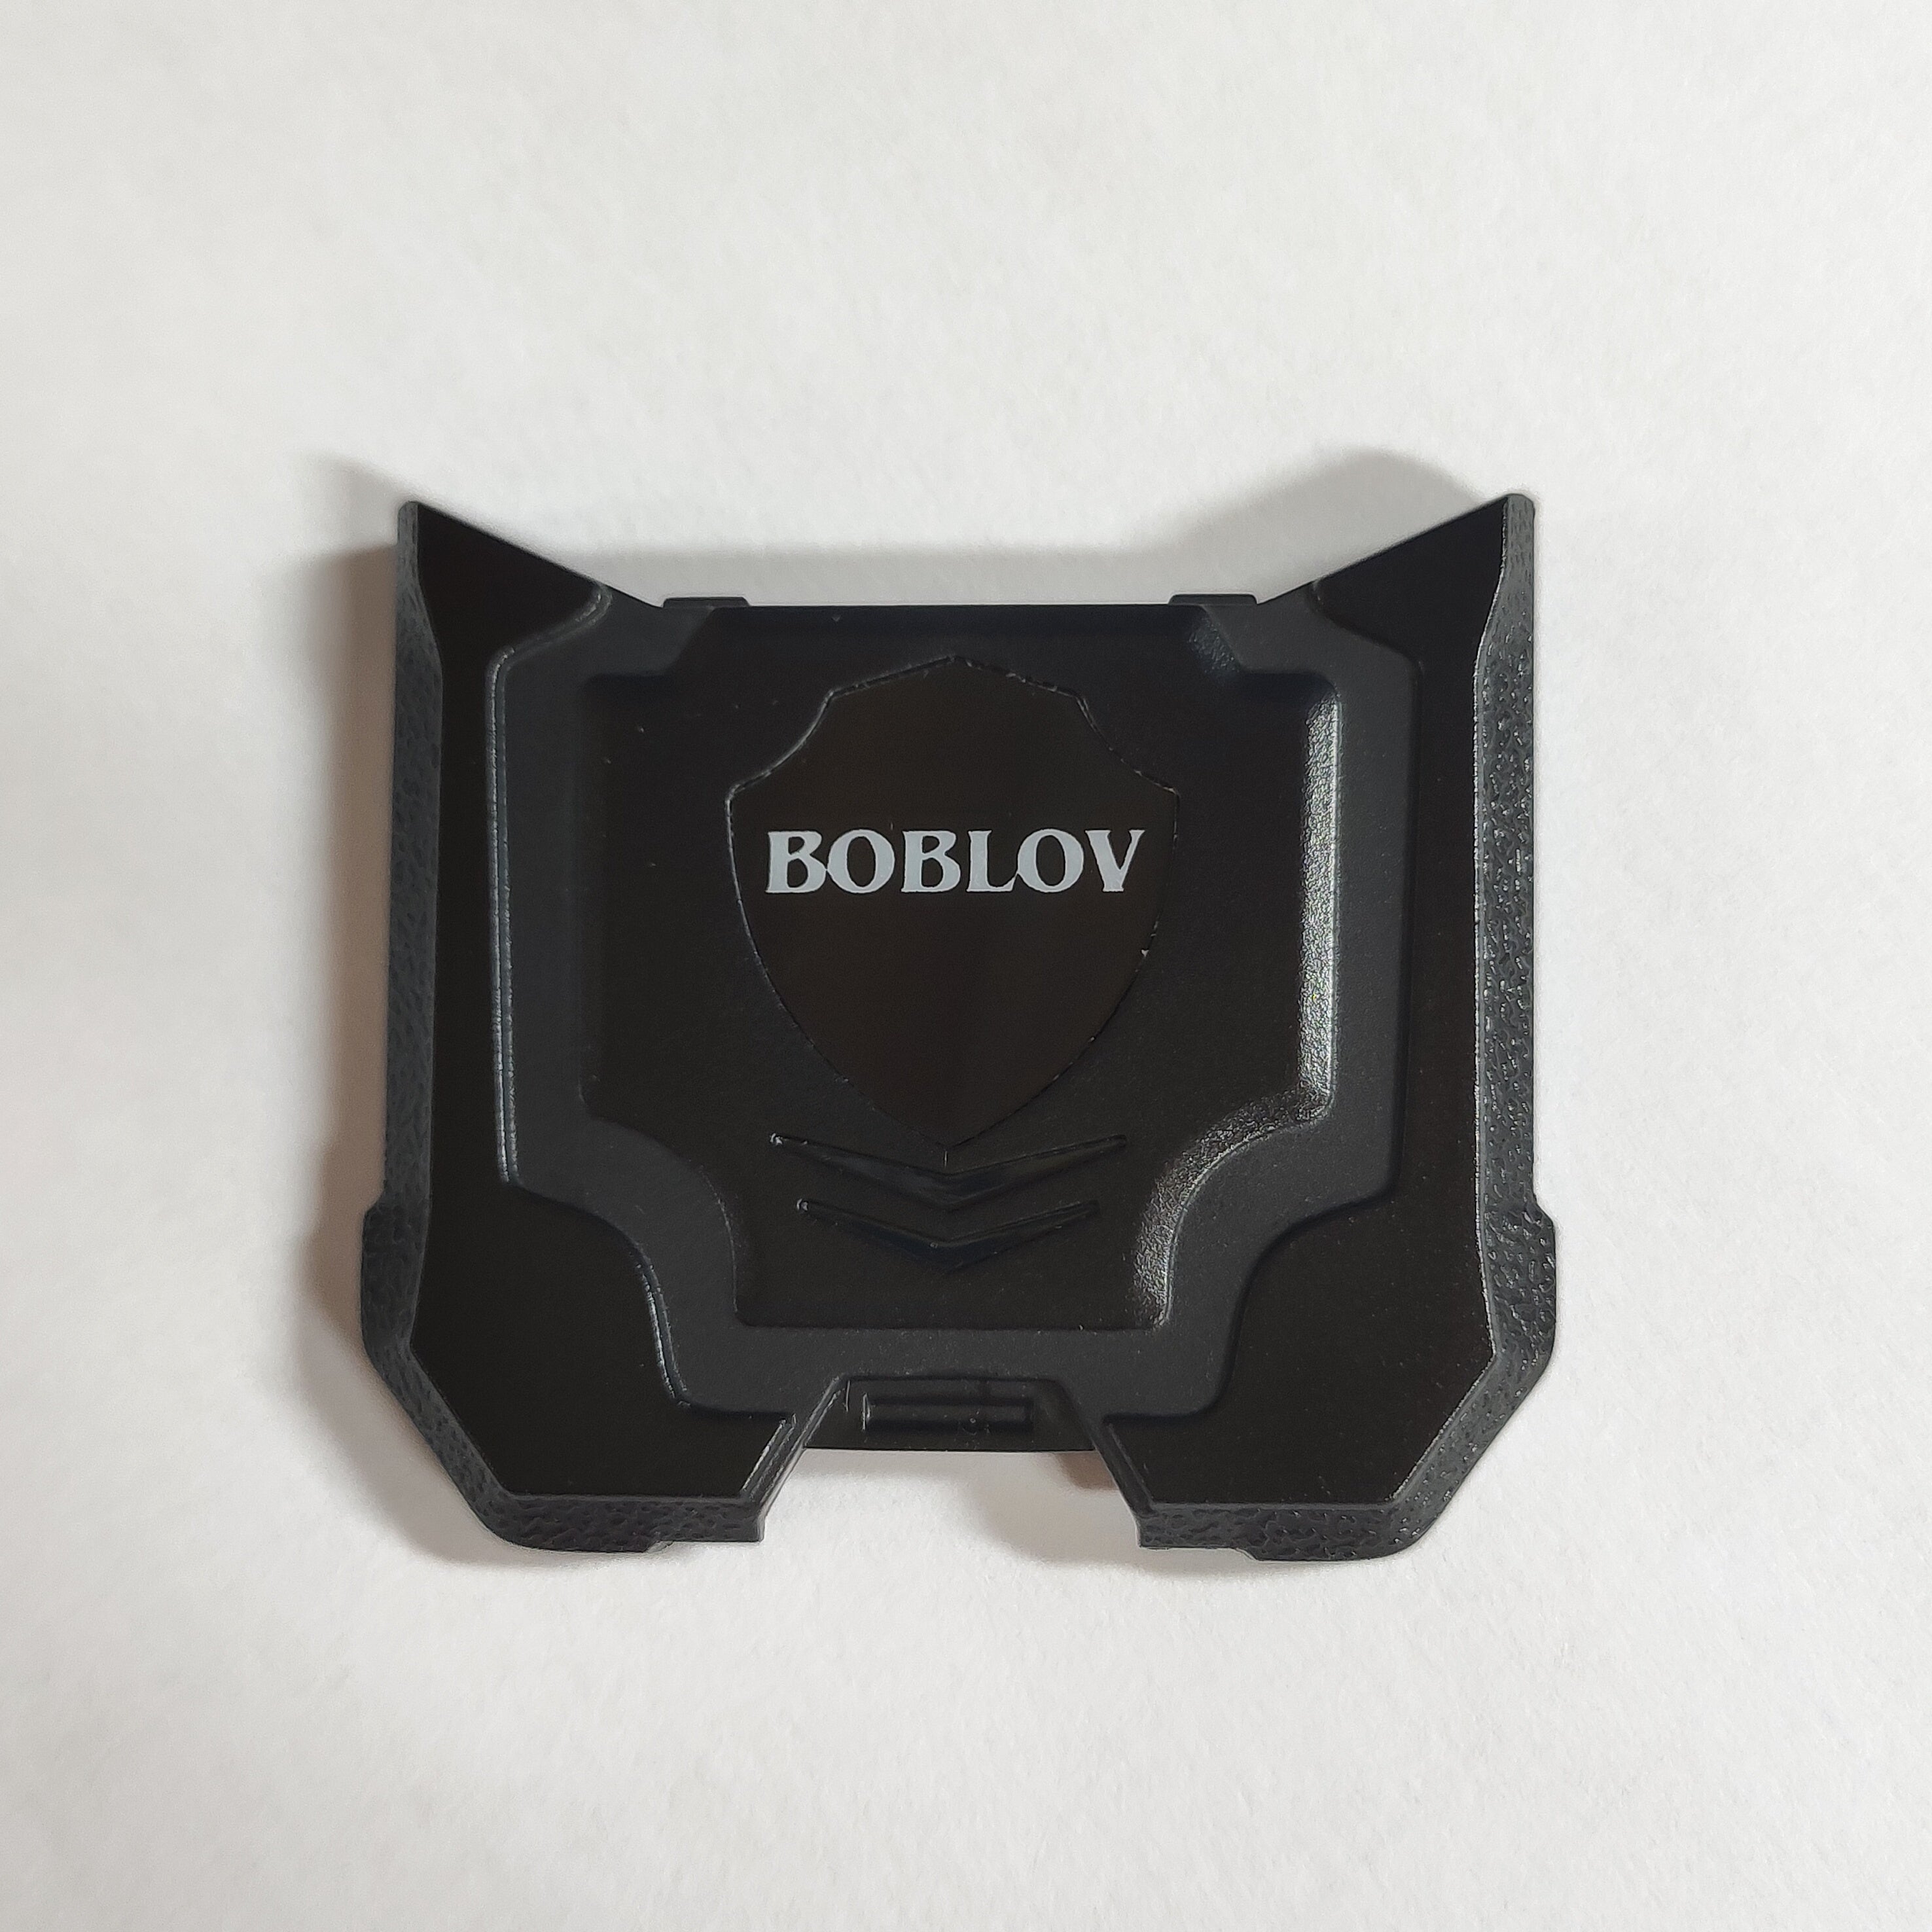 BOBLOV T5 body camera replacement battery cover2